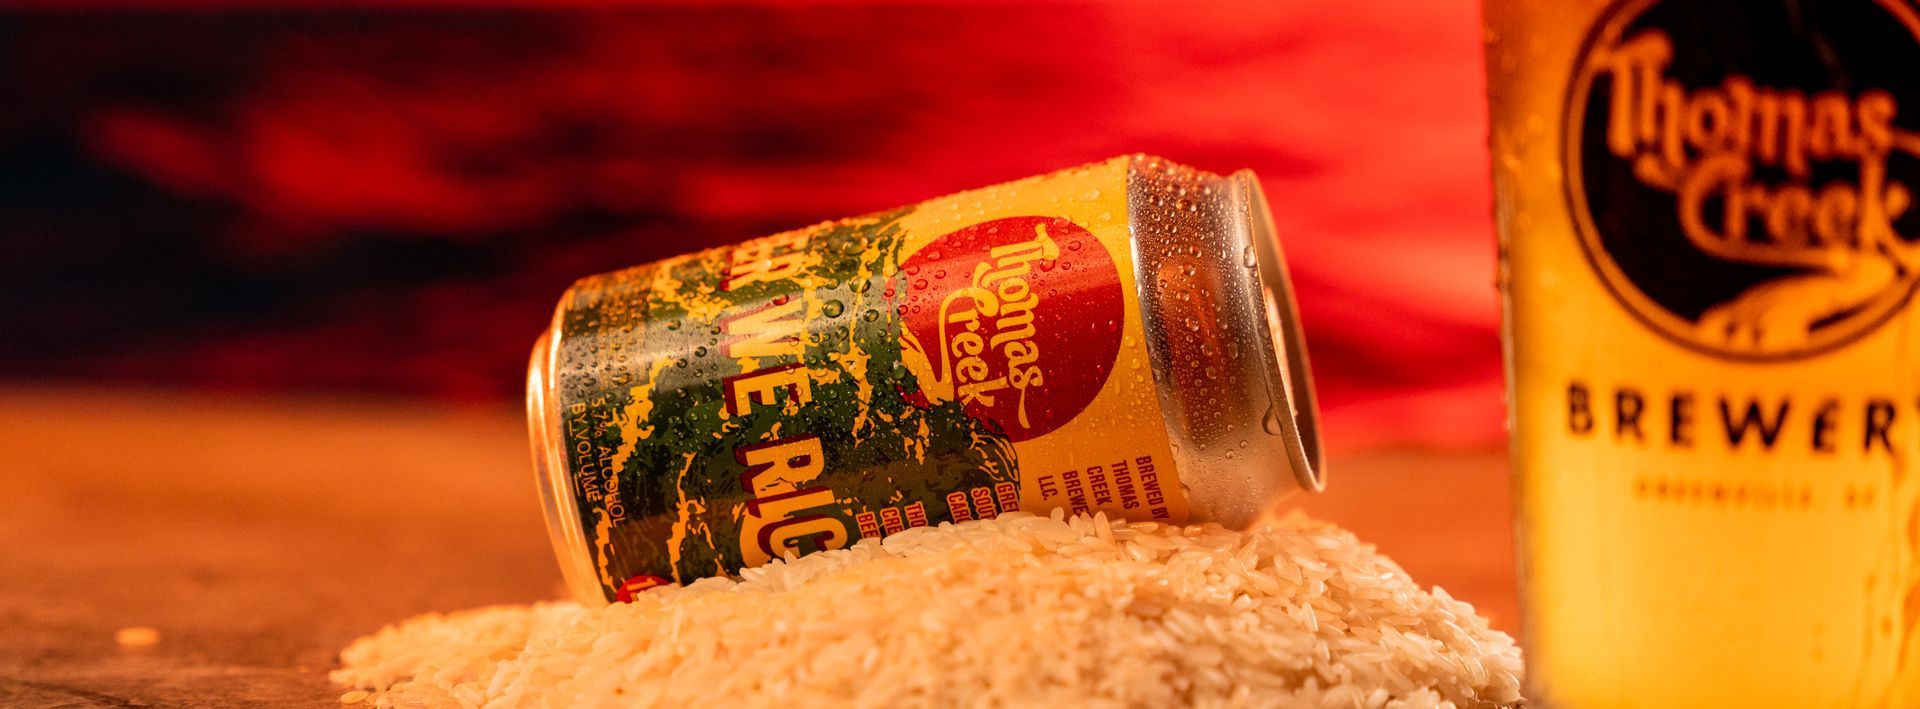 a can of beer is sitting on top of a pile of rice next to a glass of beer .